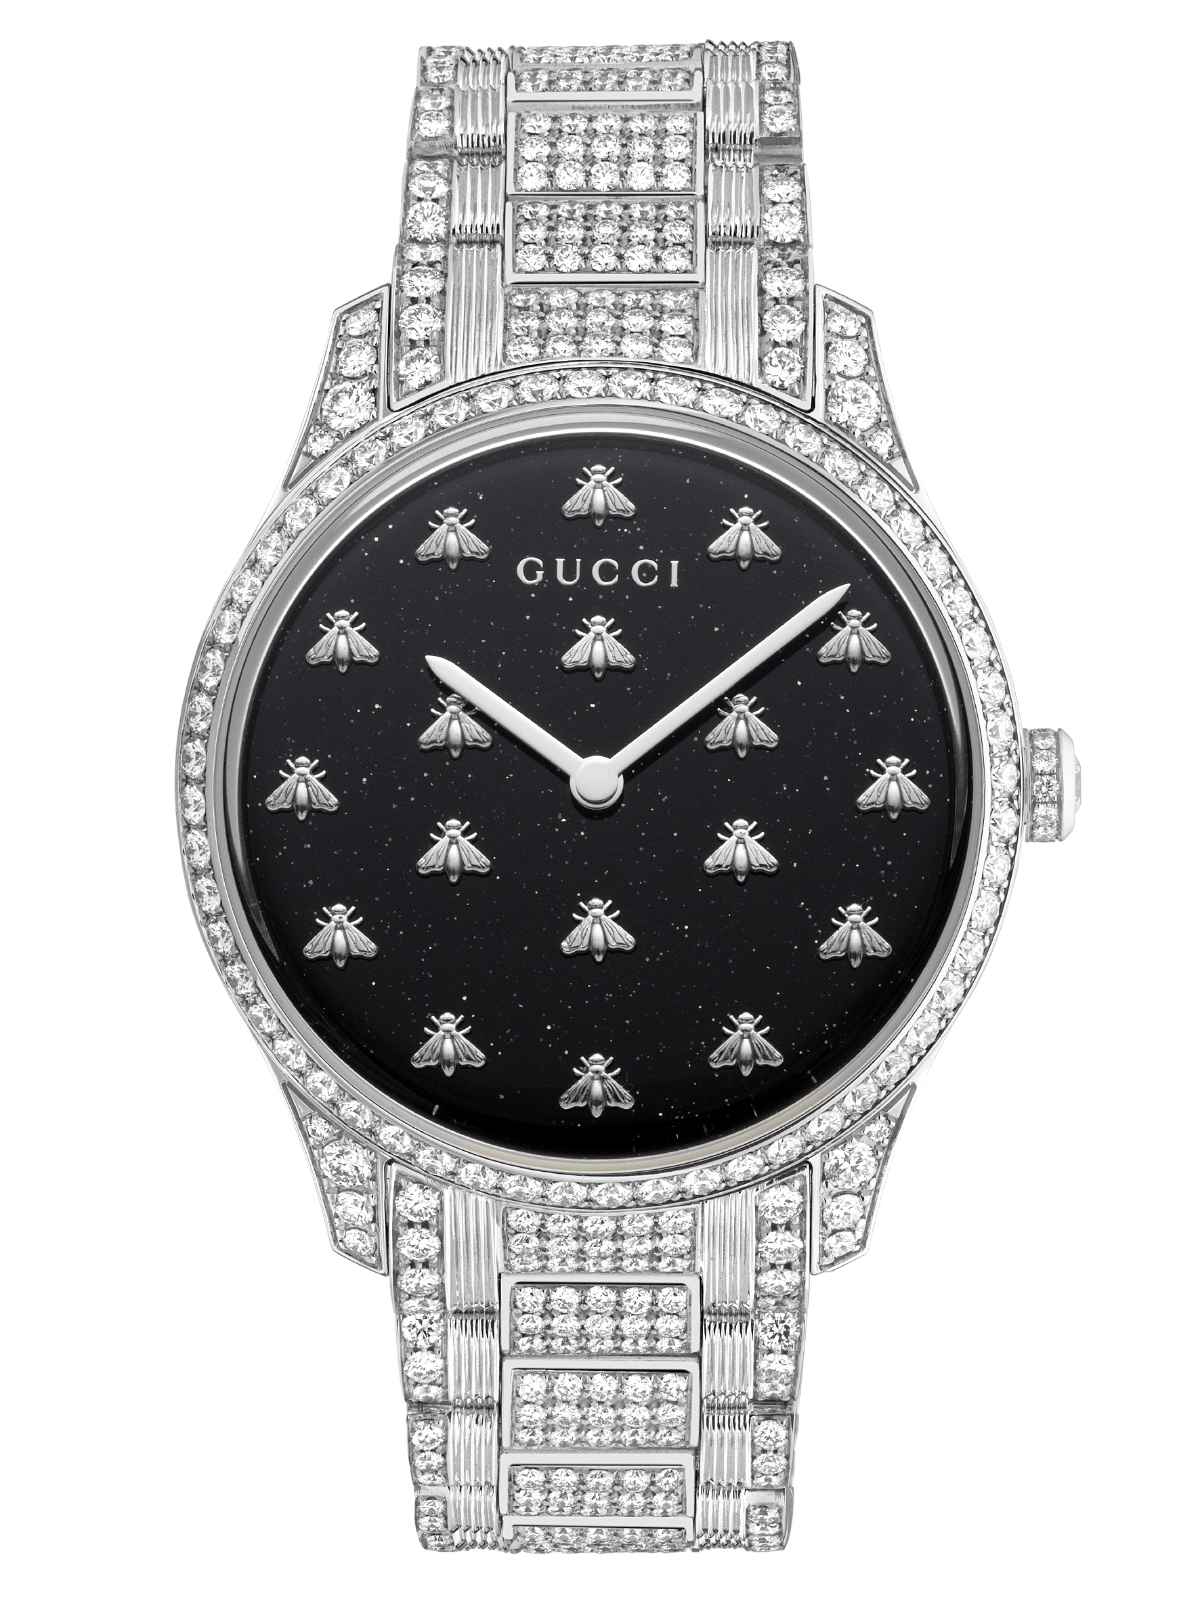 Gucci Presents Its Highly Anticipated Venture Into High Watchmaking With G-Timeless Watch Designs